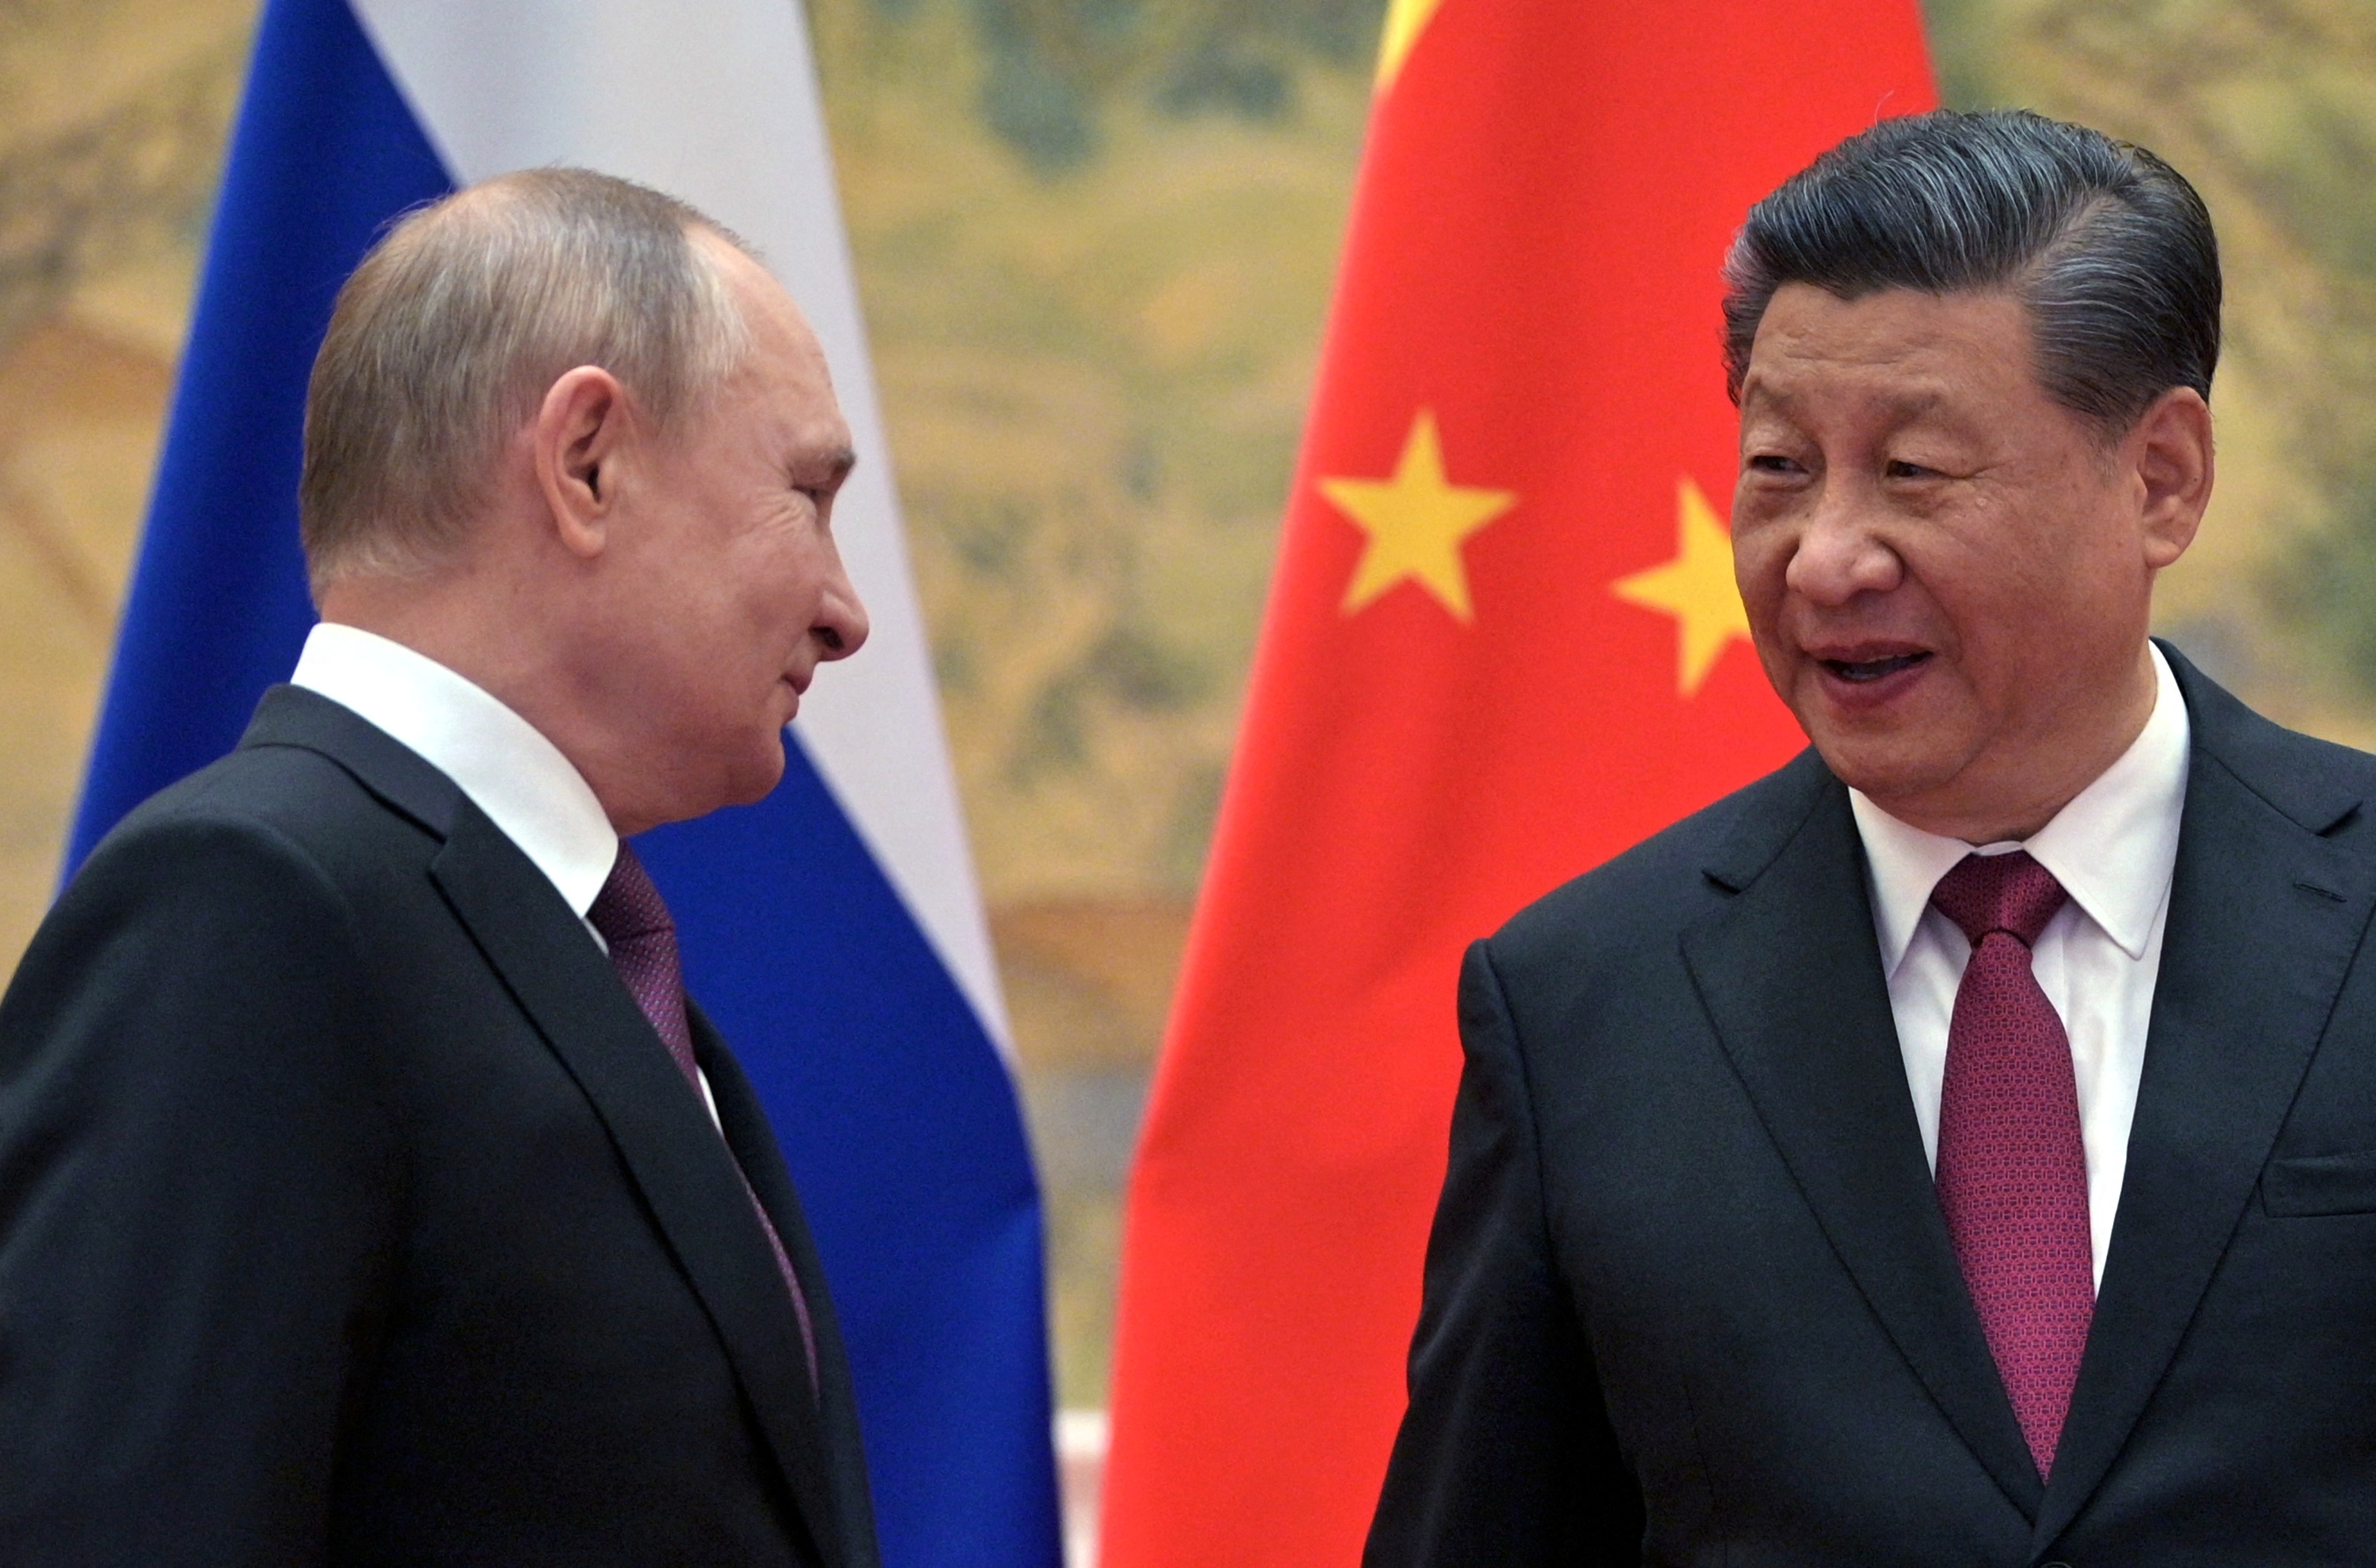 “The New York Times” claims that China asked Russia not to invade Ukraine until the Beijing Winter Olympics were over